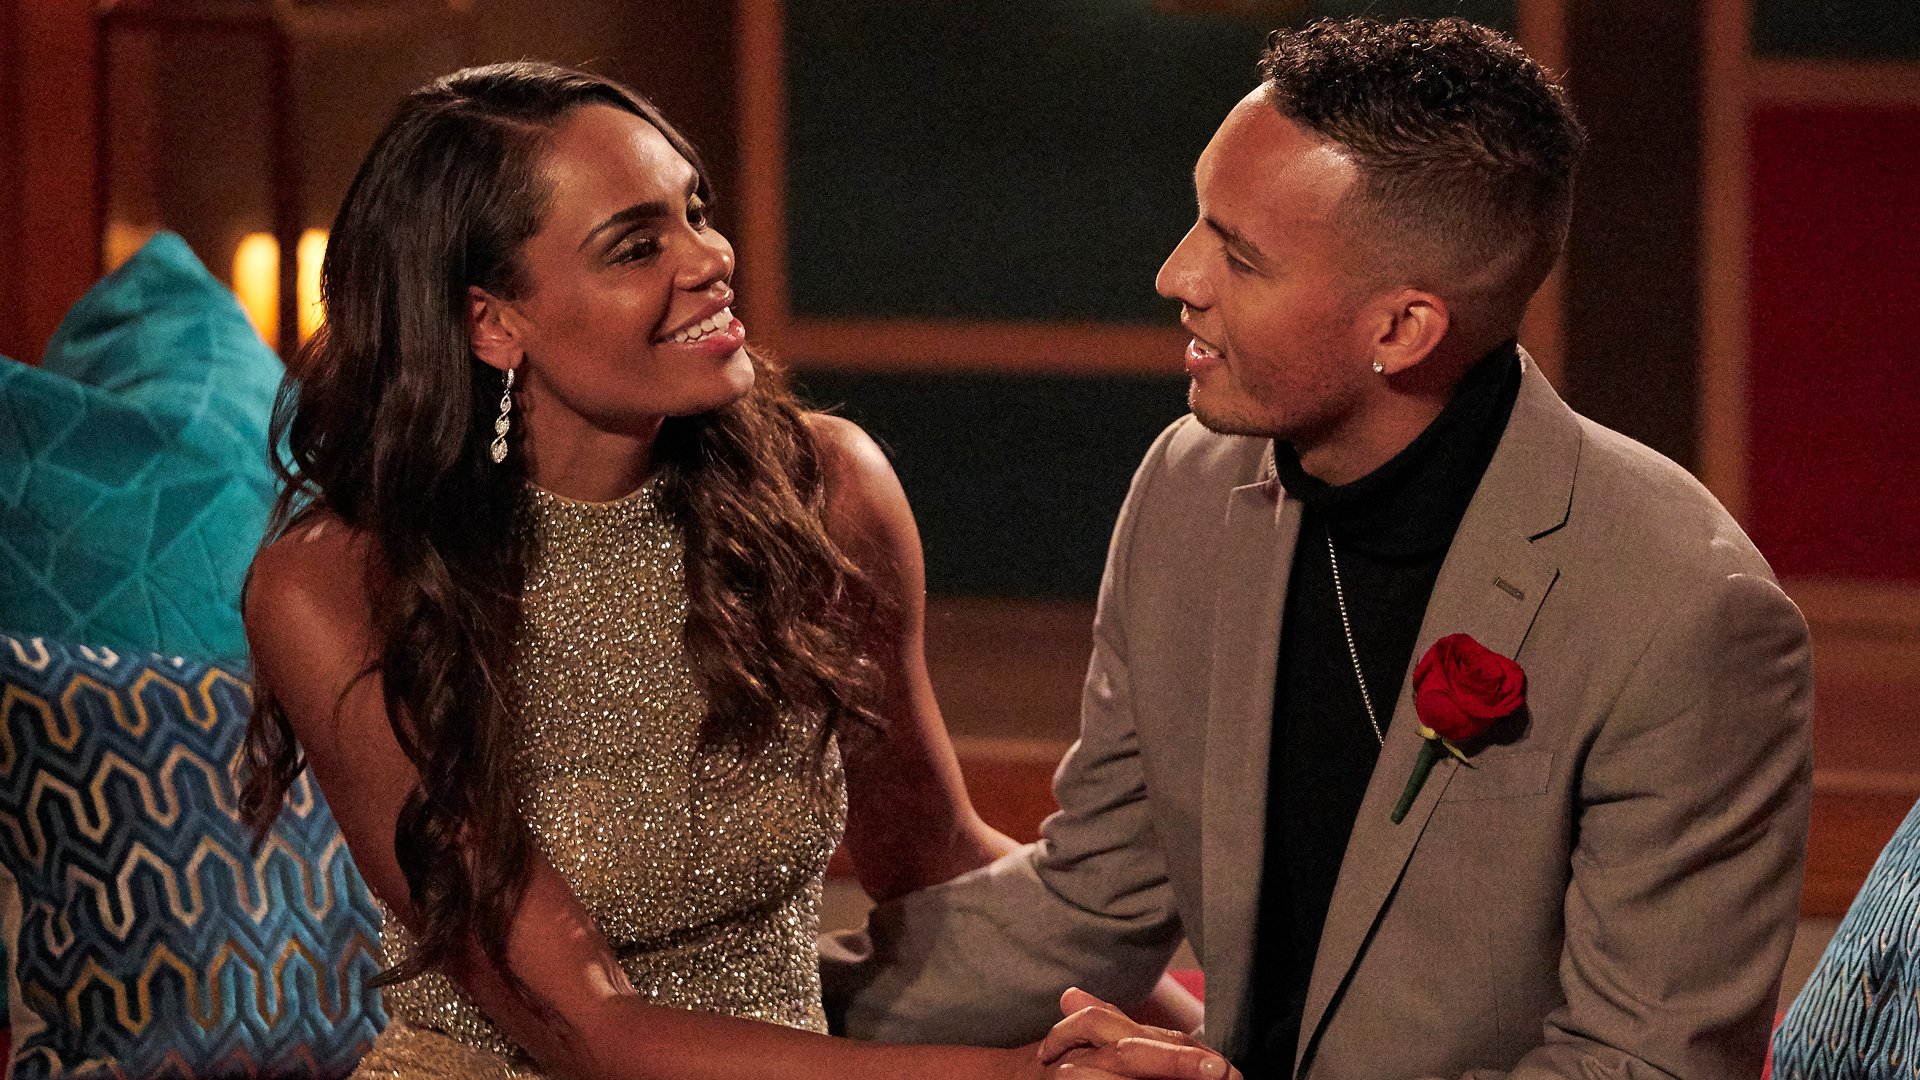 Michelle Young and Brandon Jones together after he wins the group date rose in ‘The Bachelorette’ Season 18 Episode 4